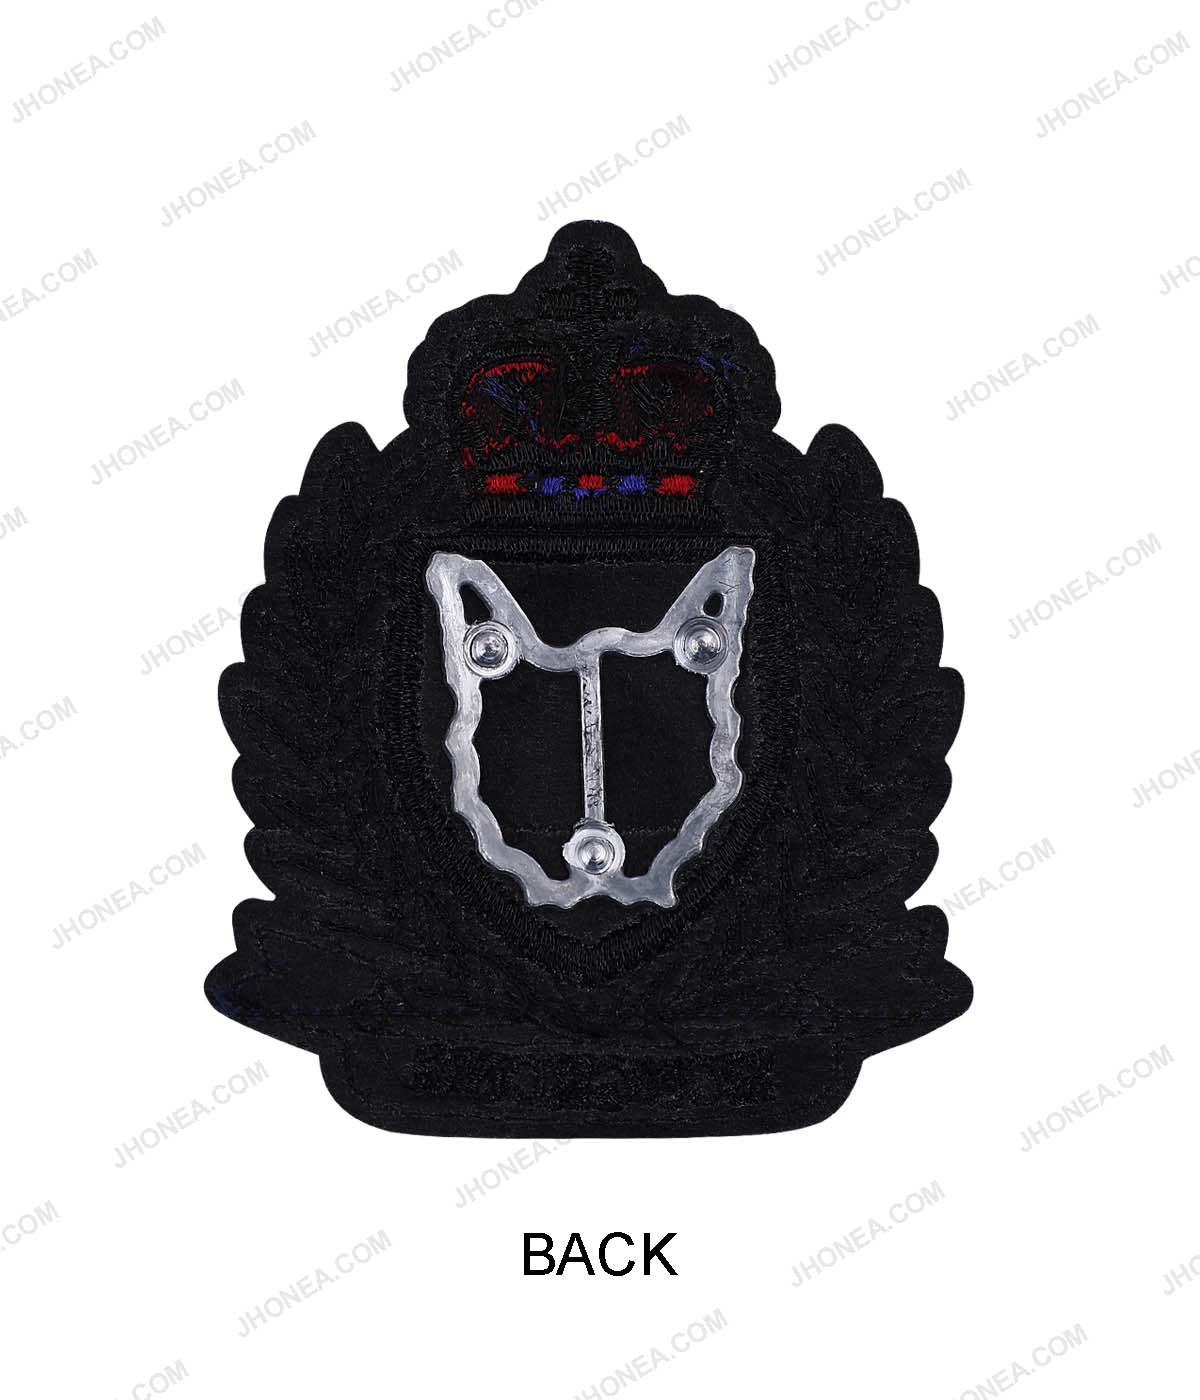 Royal Eagle Metal Crest Patch for Heavy Embellishing Clothes